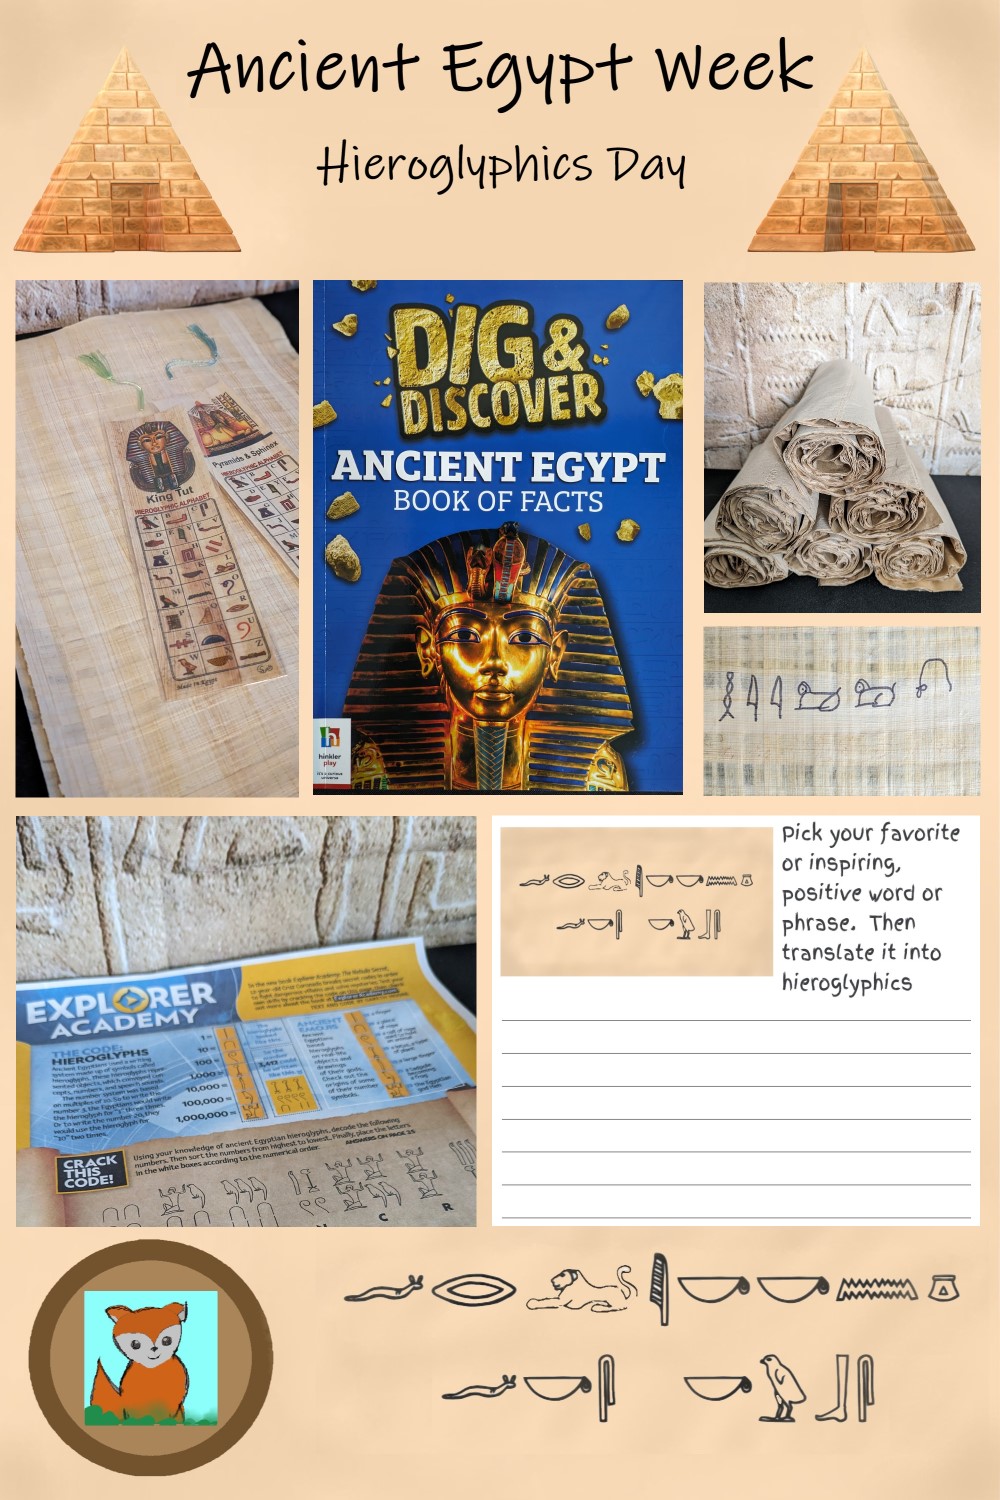 An Amazing At Home Ancient Egypt Week – Hieroglyphics Day!